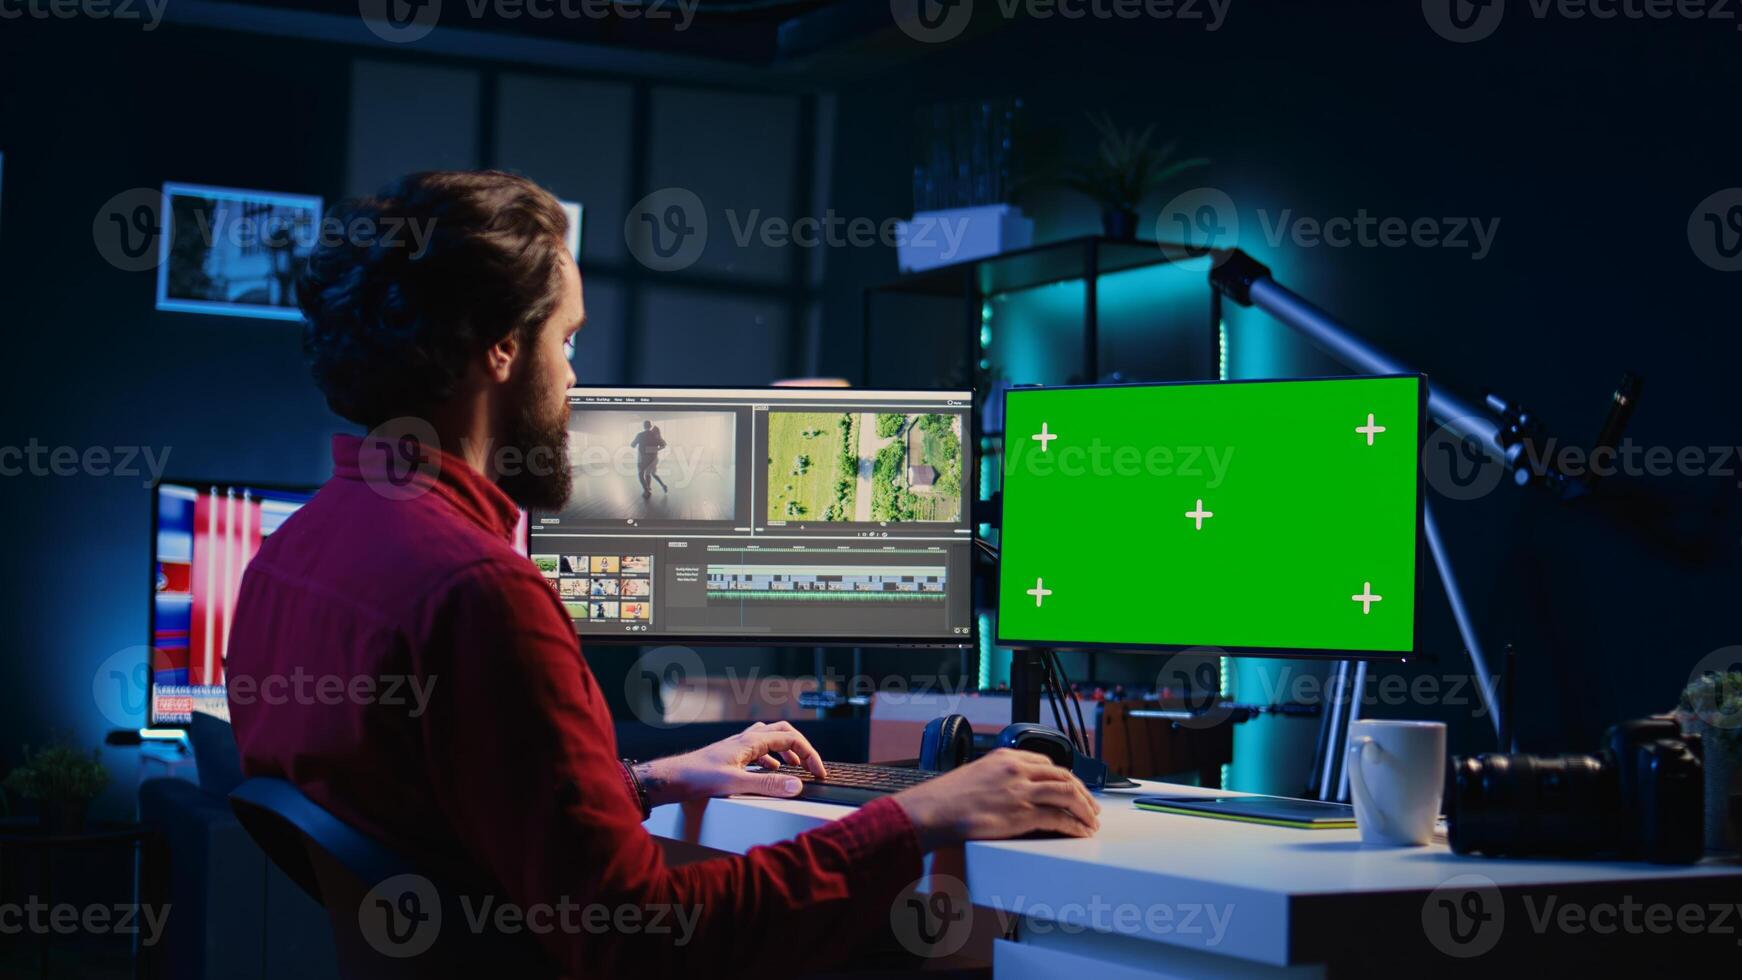 Video editor using editing software on green screen monitor to upgrade footage shot, commissioned by production teams outsourcing tasks. Freelancer videographer finishing project on mockup PC photo